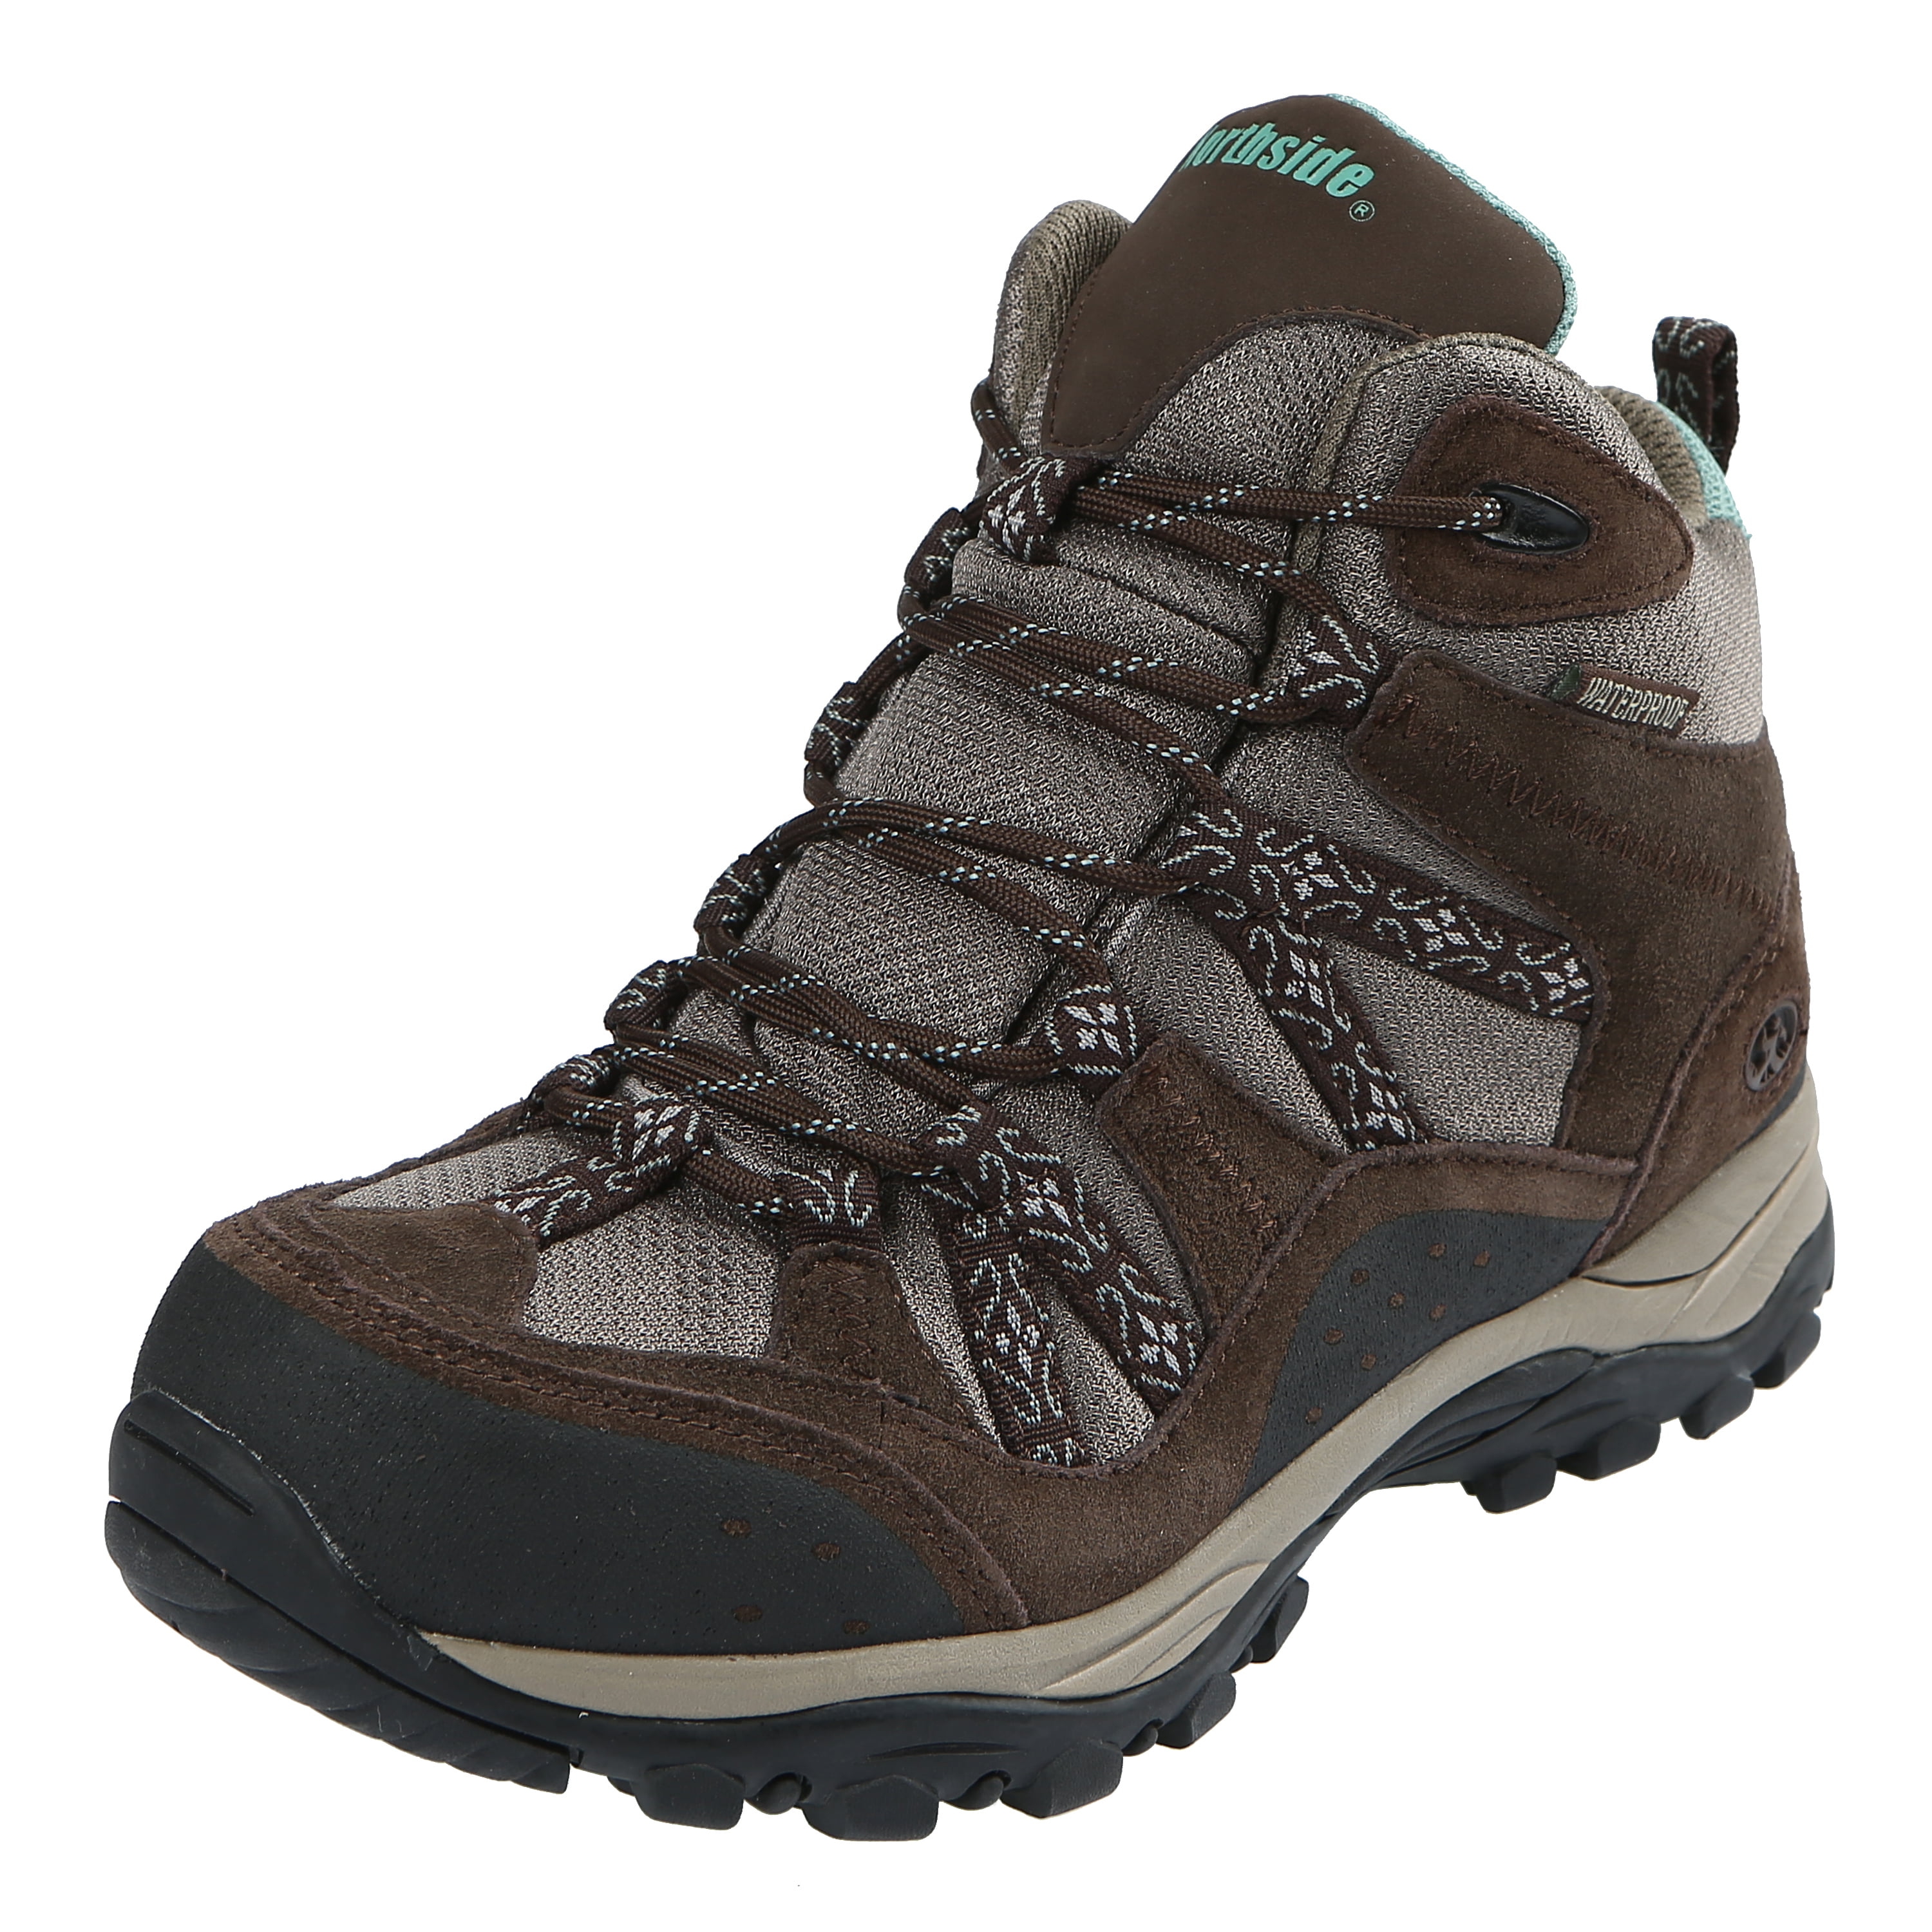 Northside Womens Freemont Leather Mid Waterproof Hiking Boot 